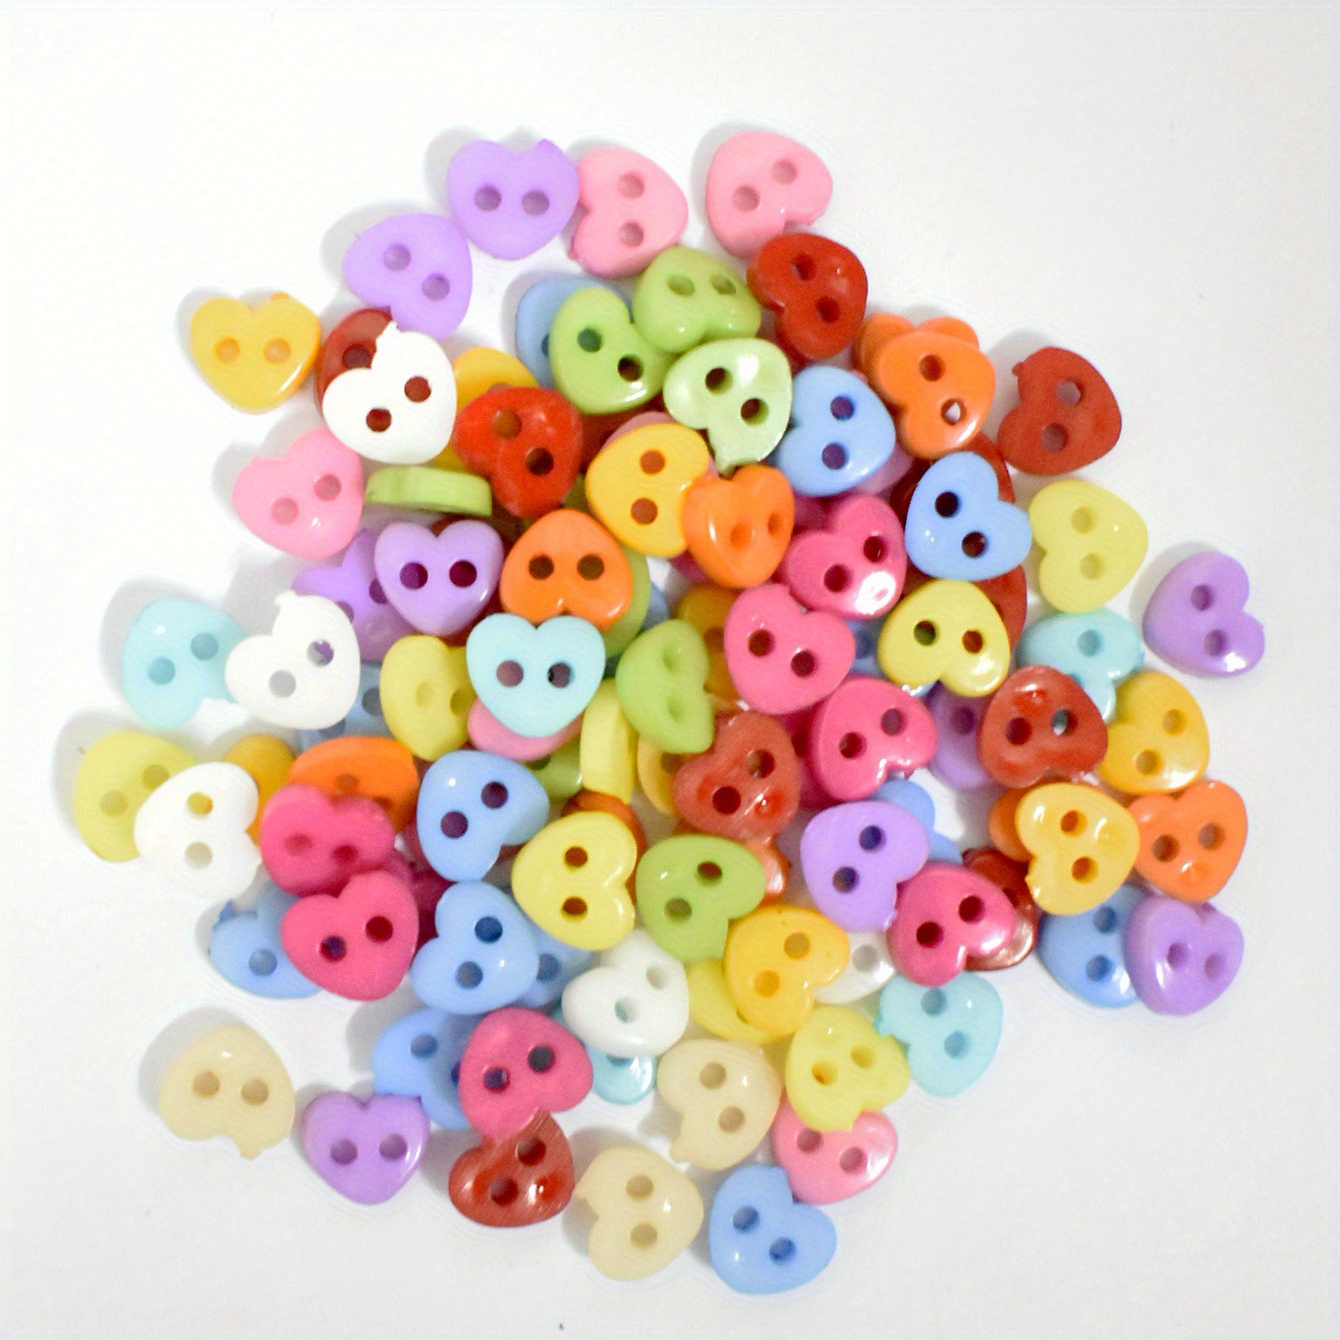 100Pcs Heart Shape Buttons Pretty Resin Buttons DIY Craft Accessories (Red)  